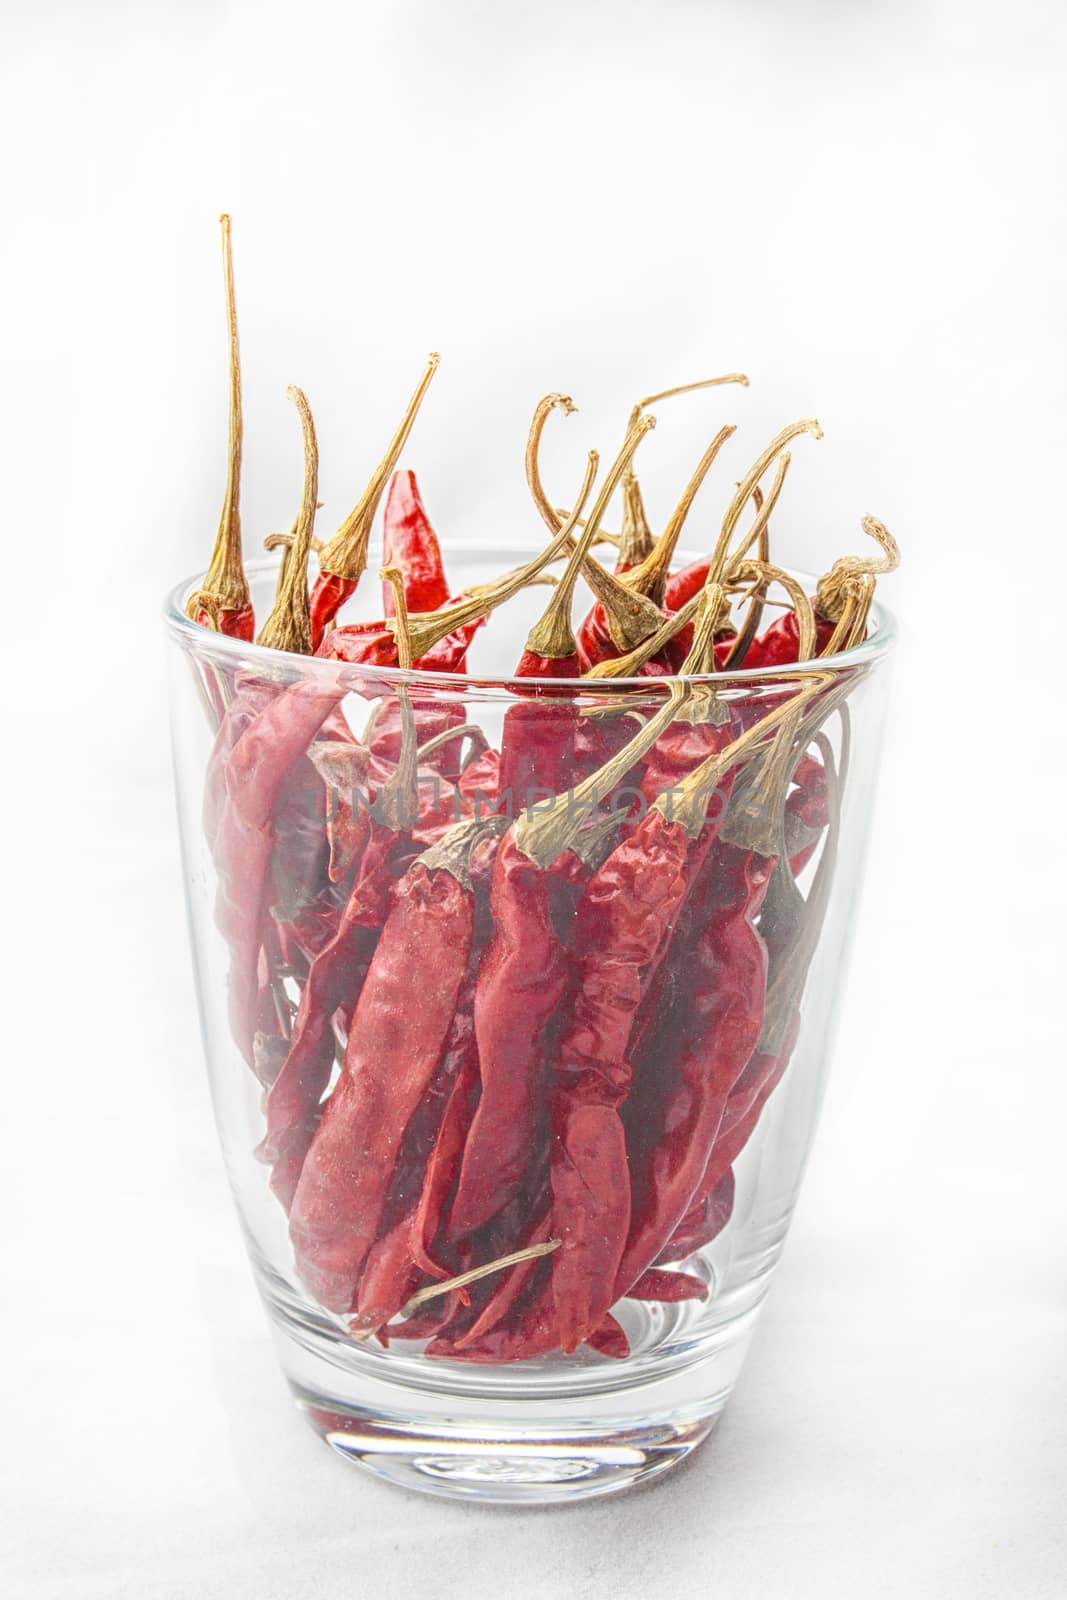 Dried red chili pepper in glass isolated on white background .